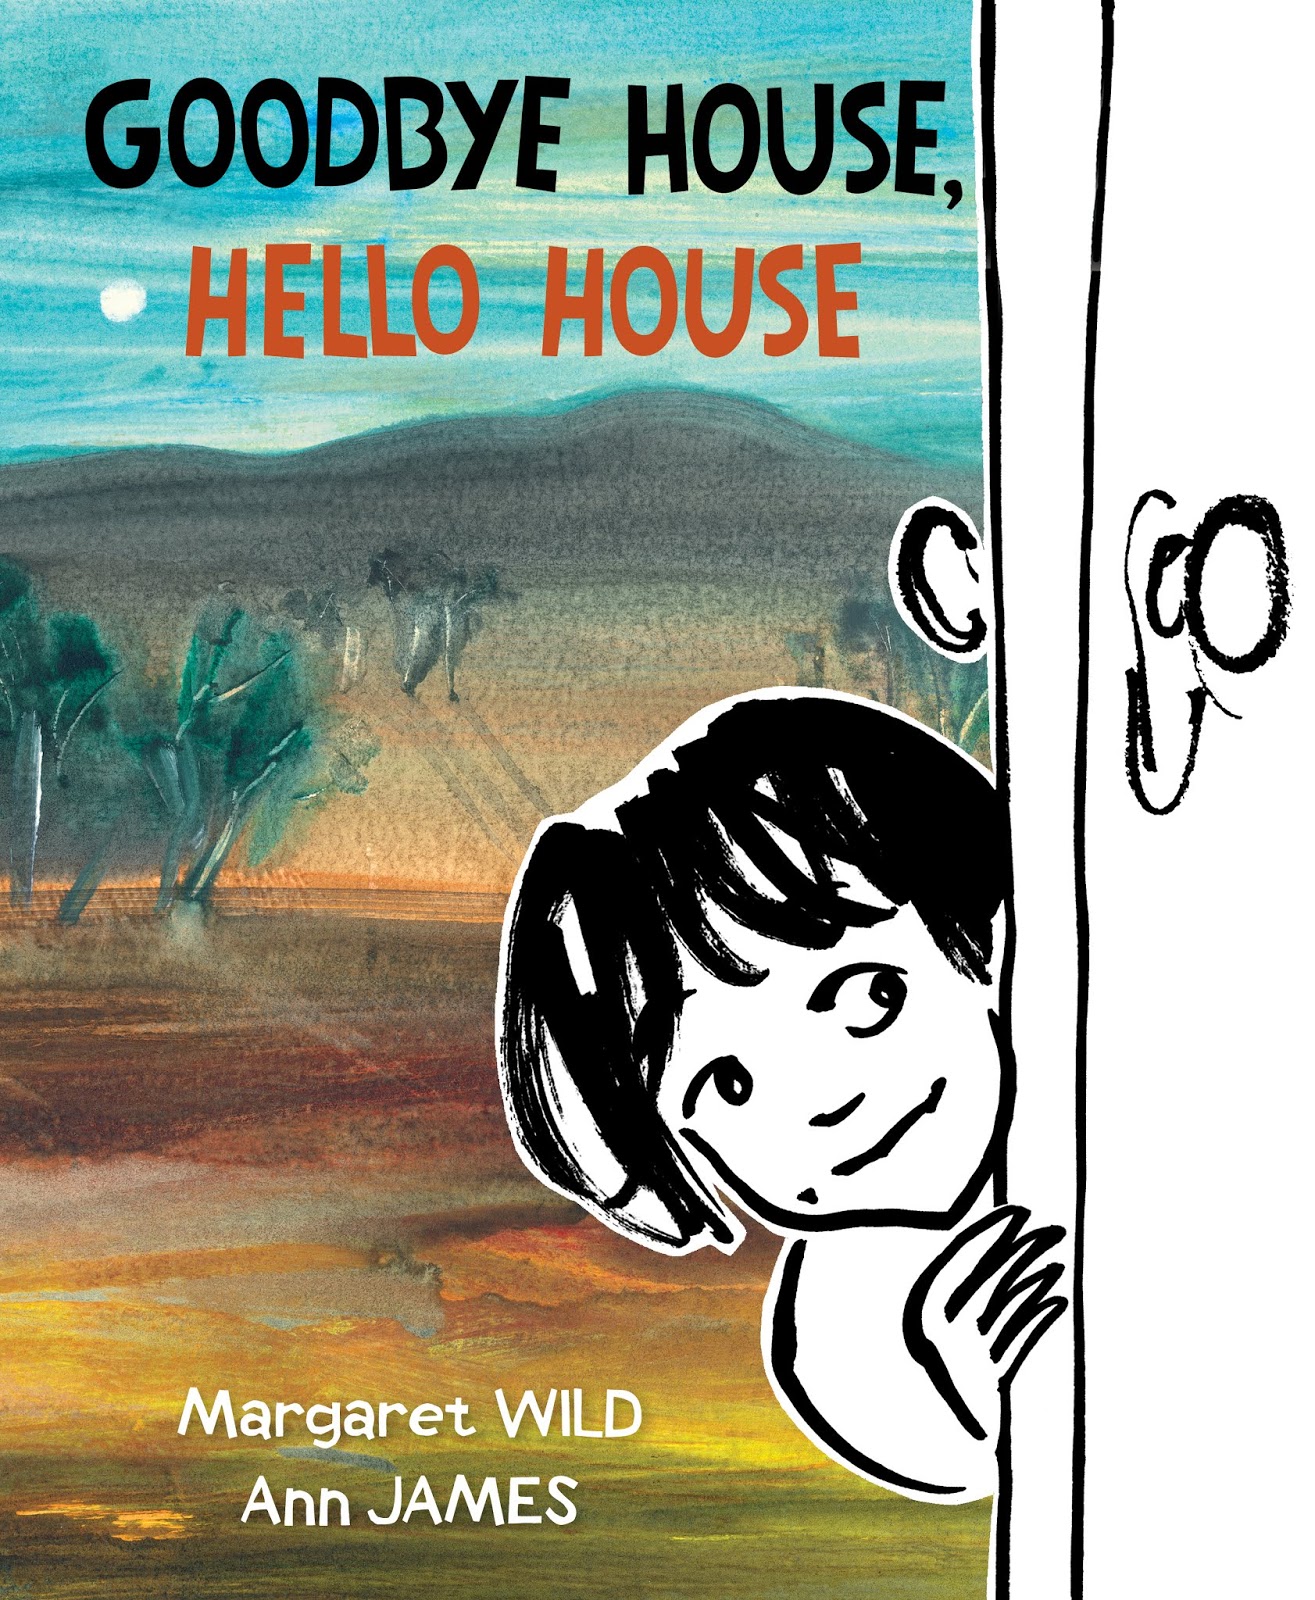 Kids' Book Review: Review: Goodbye House, Hello House